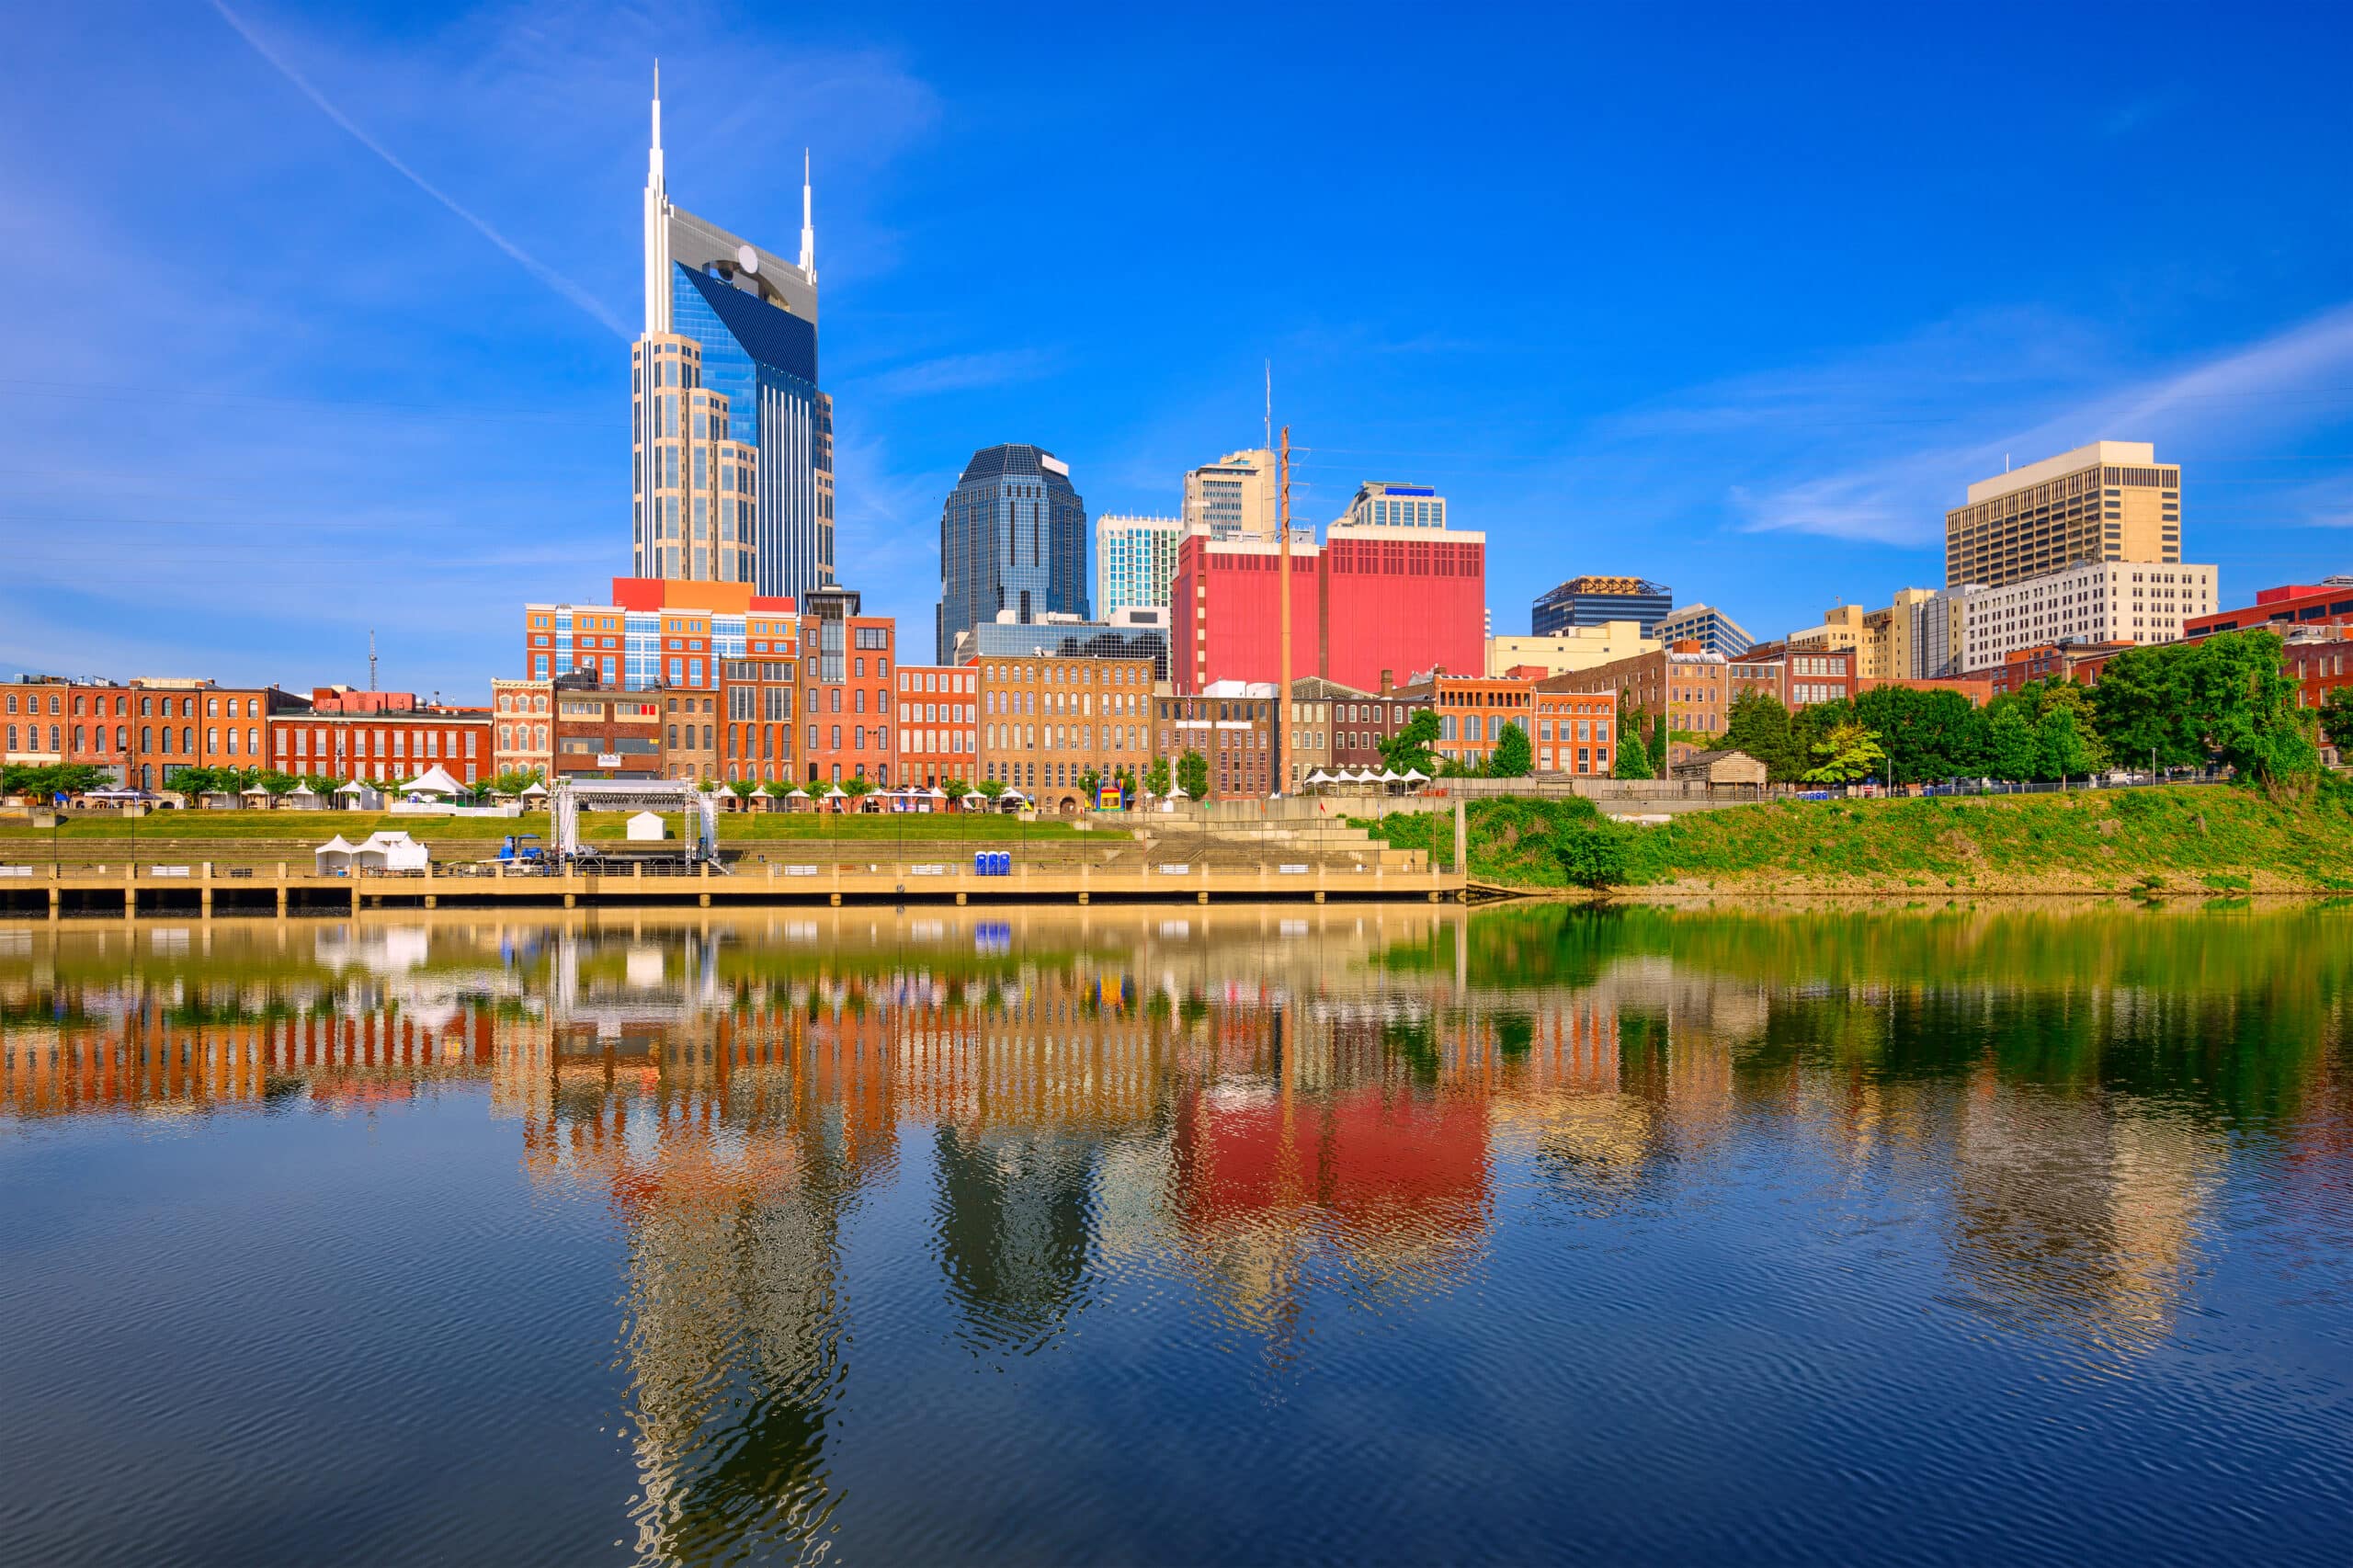 Nashville skyline reflected in a body of water.